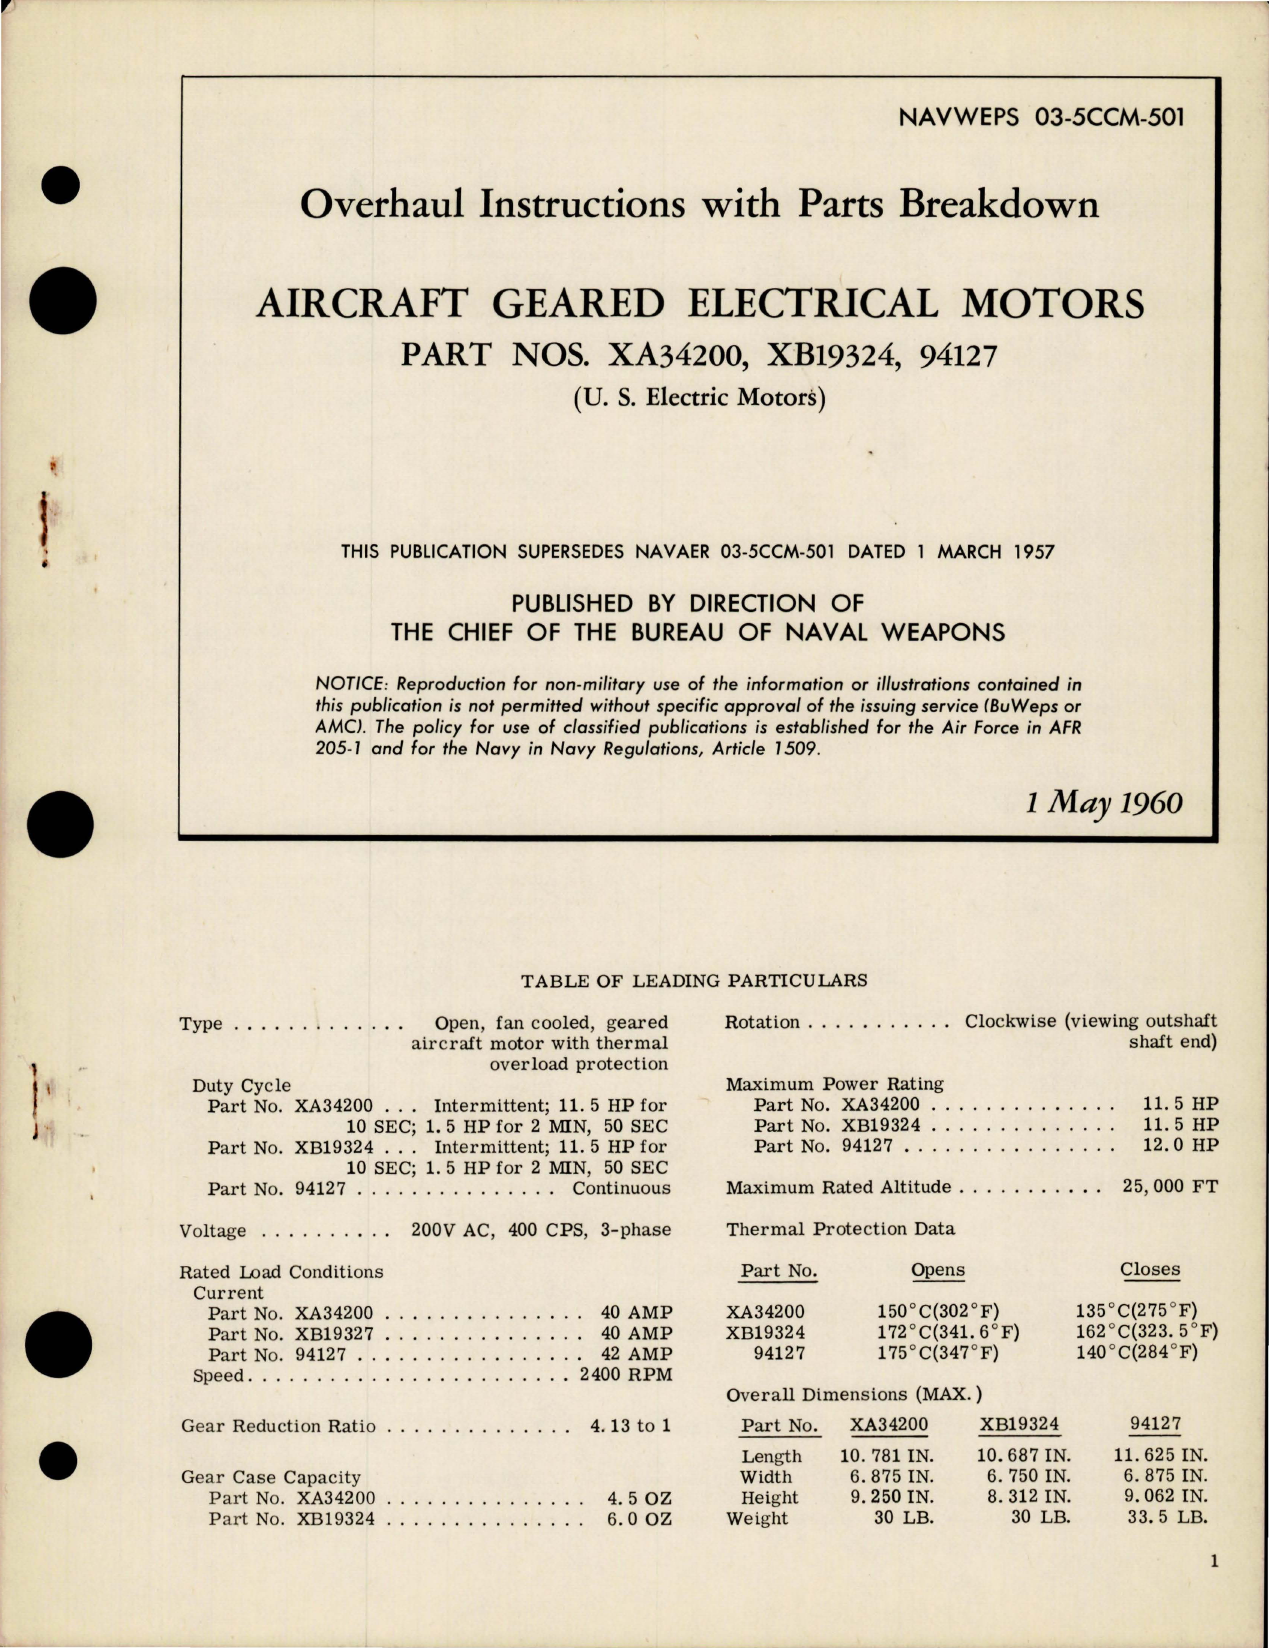 Sample page 1 from AirCorps Library document: Overhaul Instructions with Parts for Geared Electrical Motors - Parts XA34200, XB19324, 9412 